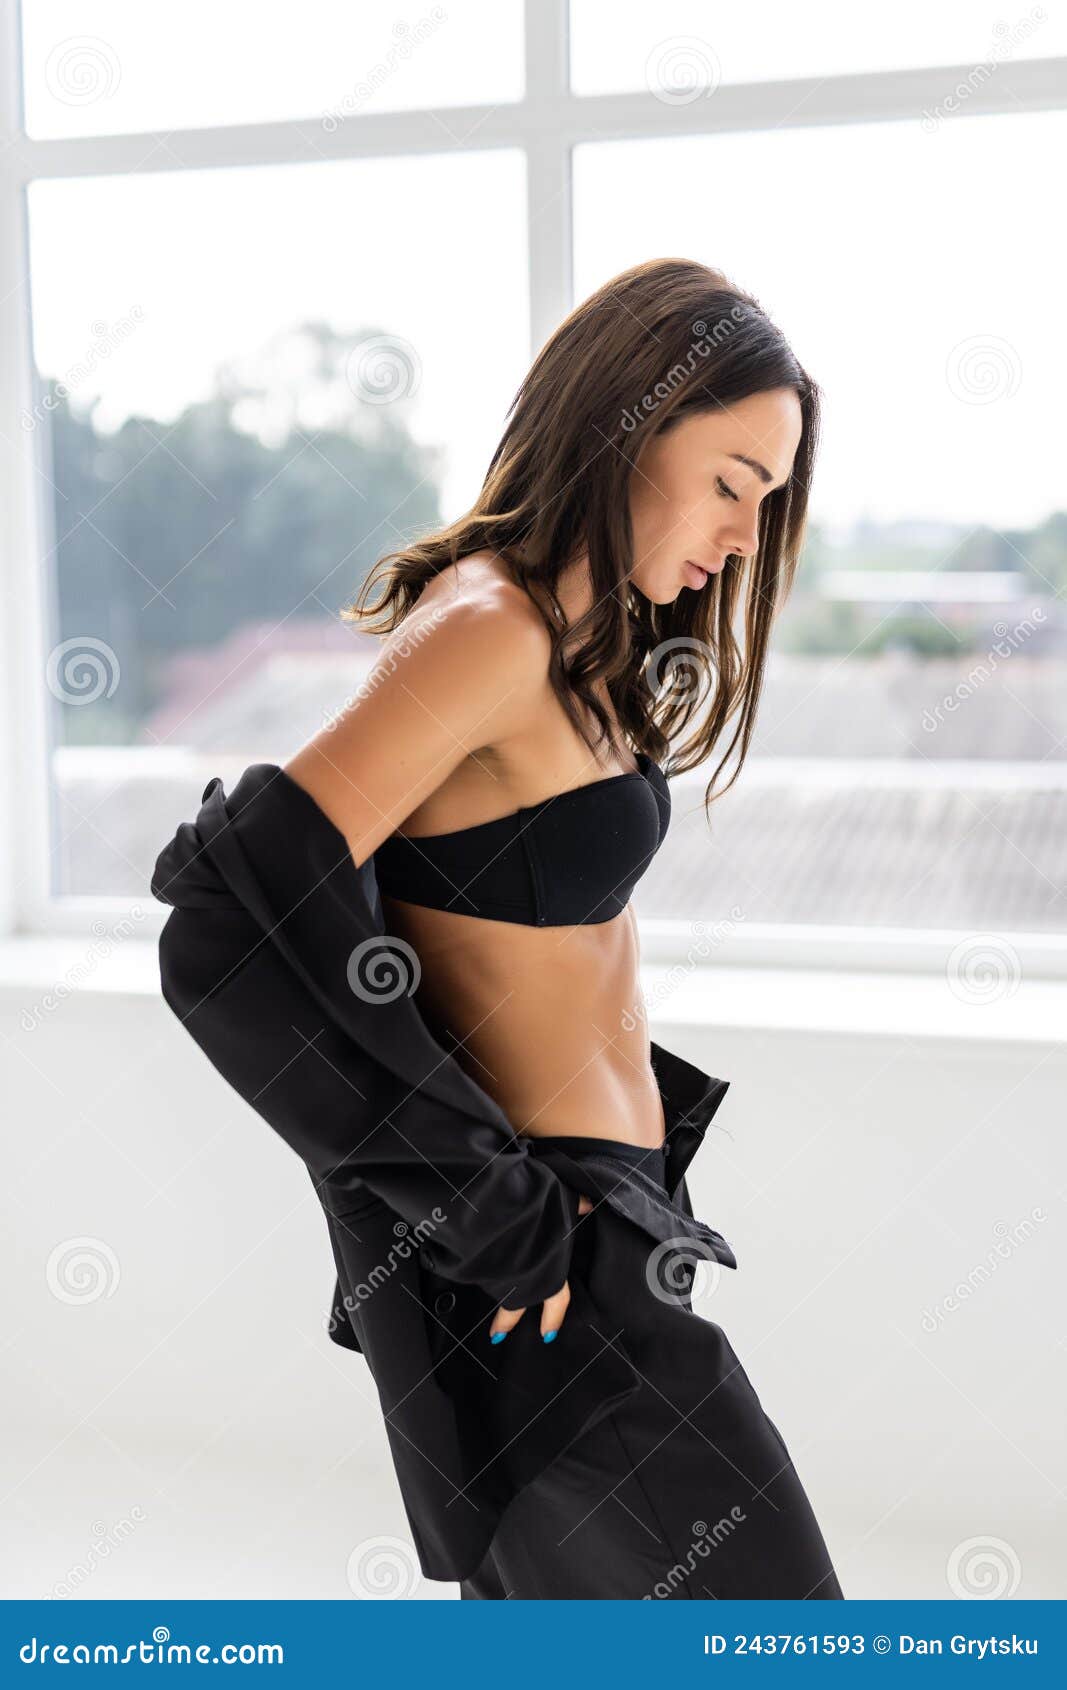 Slim Brunette Woman Wearing Fashionable Black Suit with No Bra is Fashion  Posing Studio Stock Image - Image of lady, shoes: 243761593